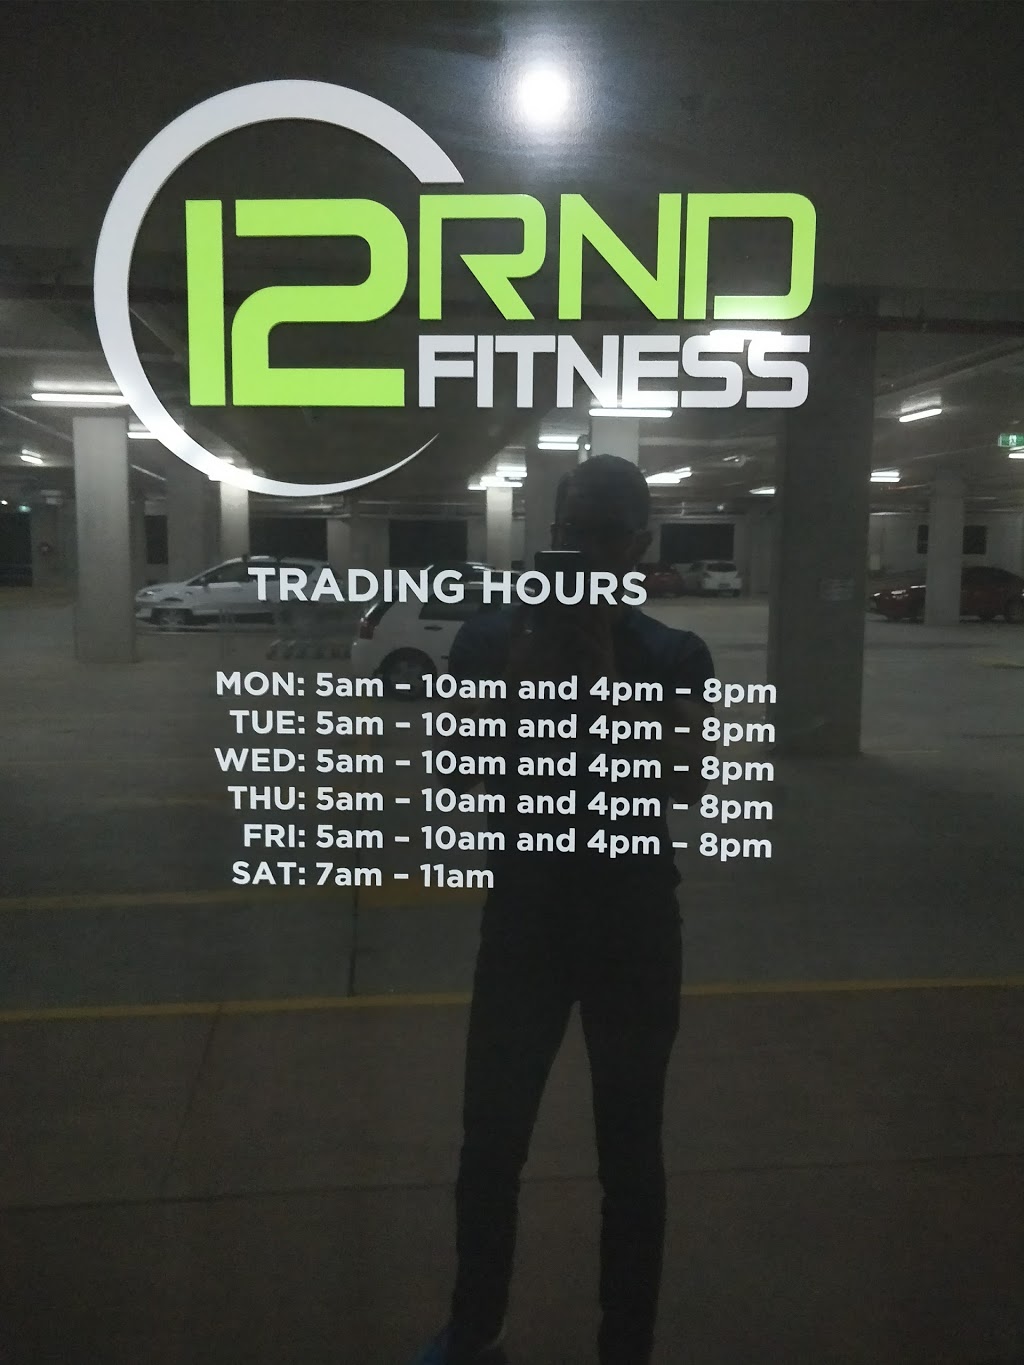 12RND Fitness Eatons Hill | gym | Shop 21/640 S Pine Rd, Brendale QLD 4037, Australia | 0452127639 OR +61 452 127 639